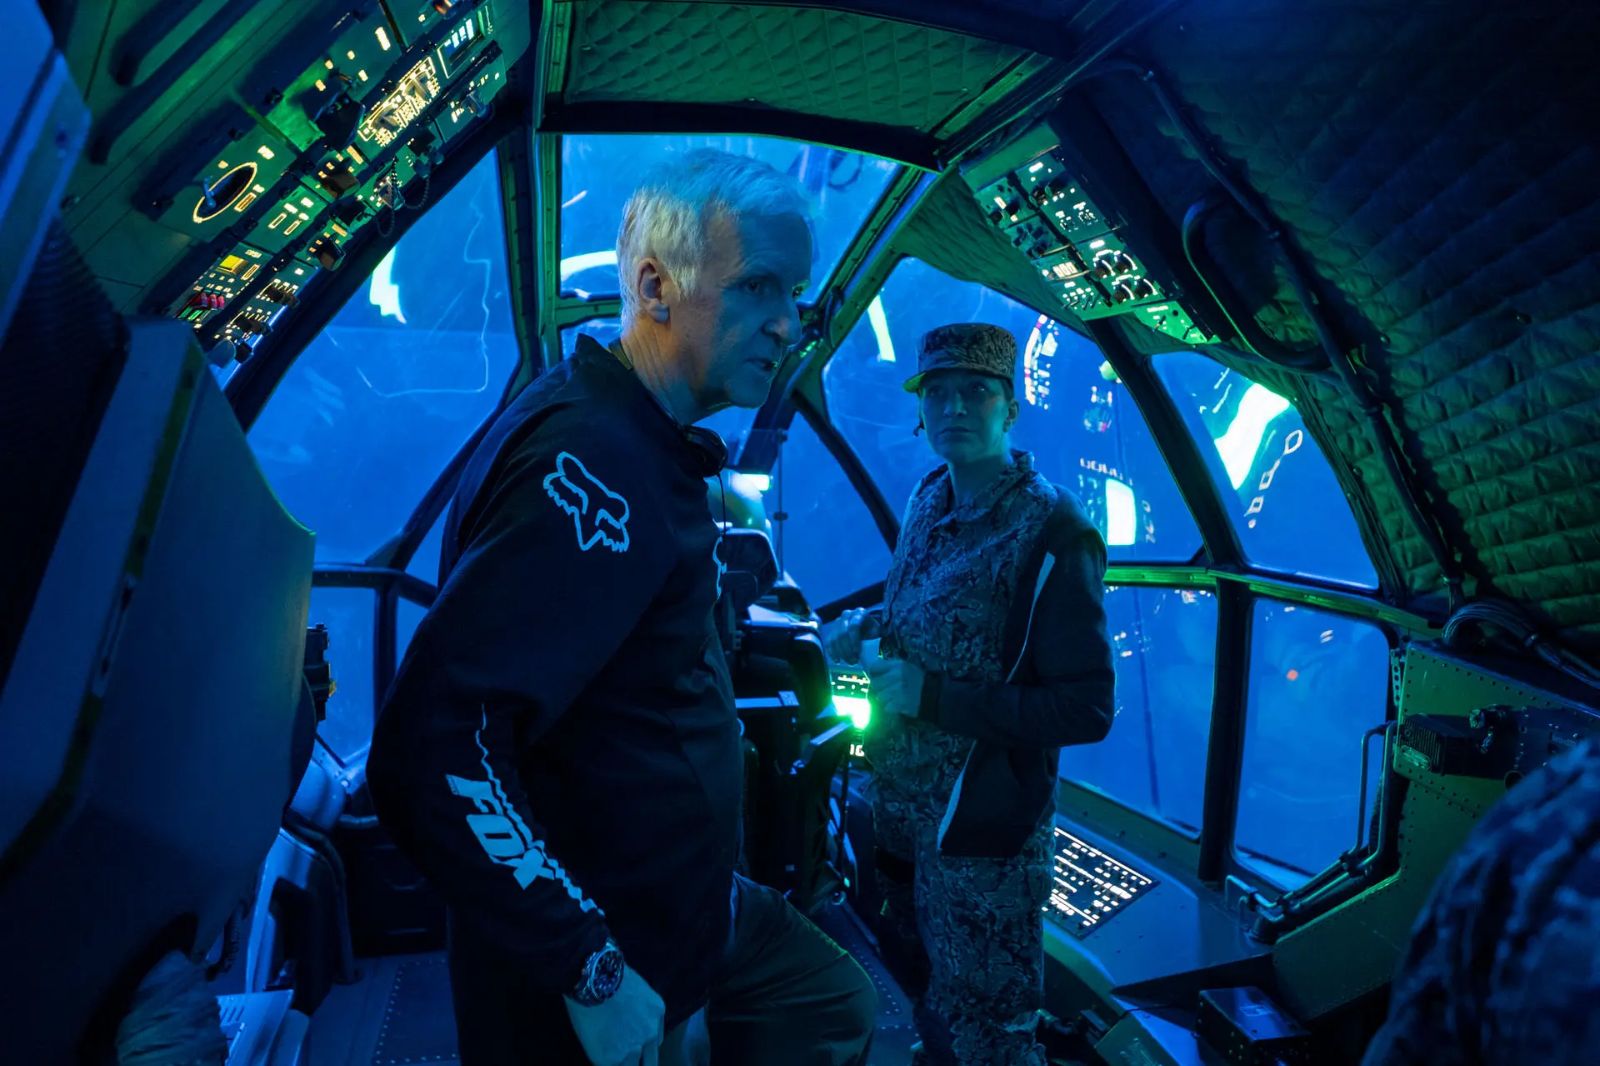 Movies News: James Cameron Says His Filmmaking Process is Exactly Like the “Smallest Independent Film”